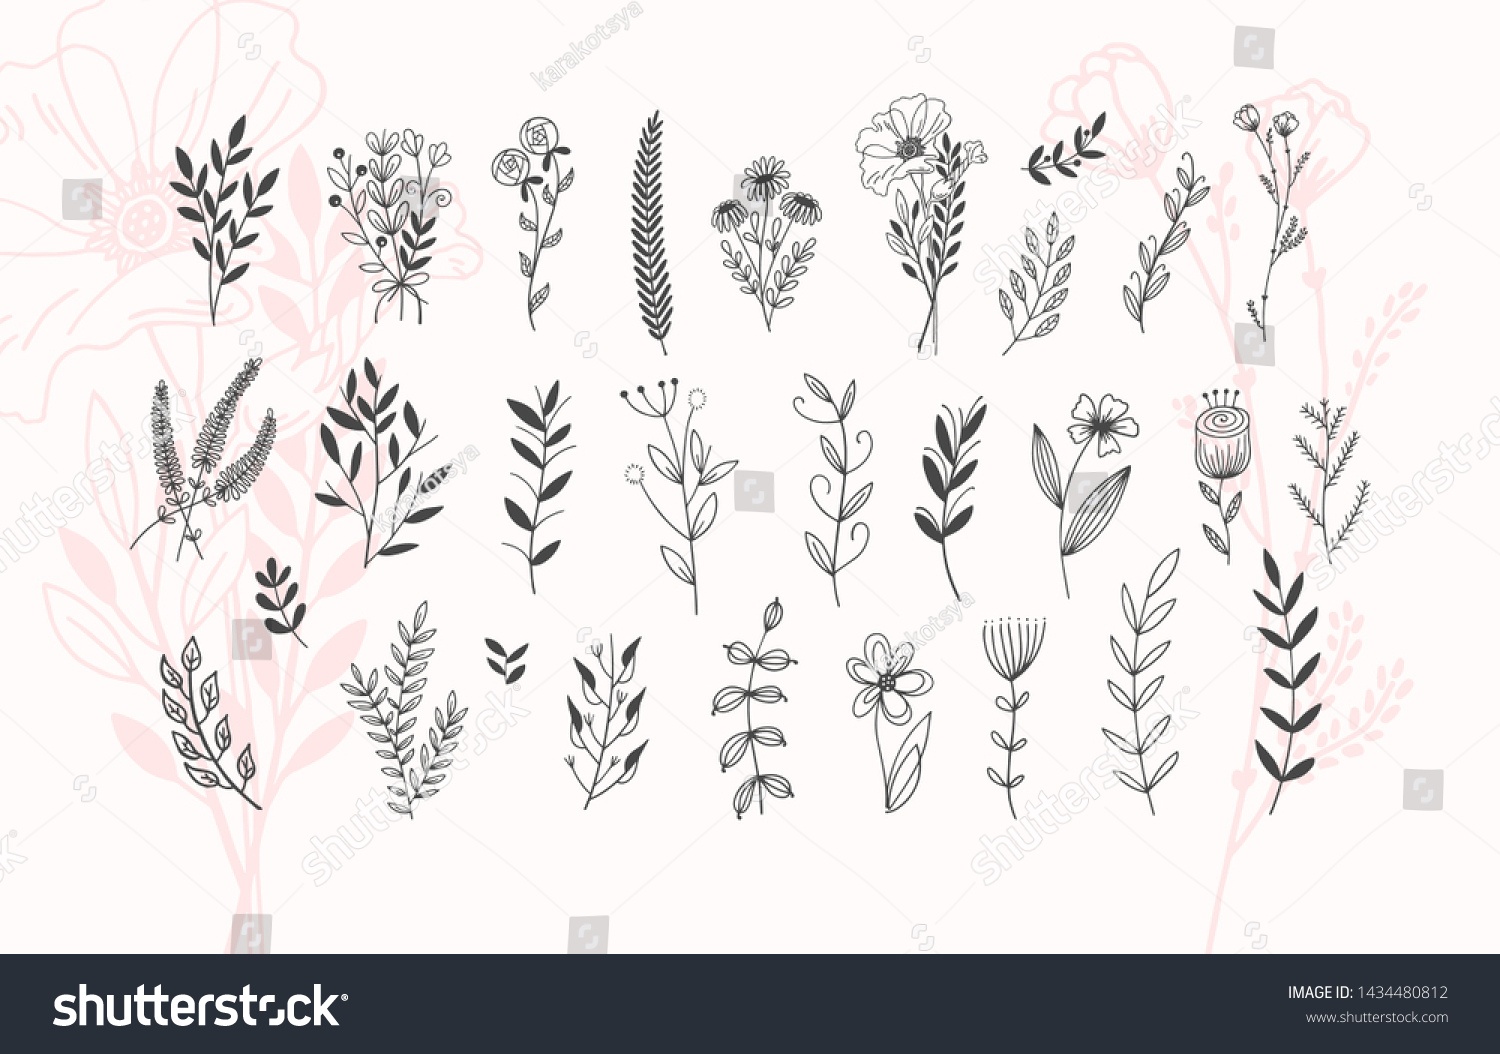 332,337 Simple Flower Drawing Images, Stock Photos & Vectors ...